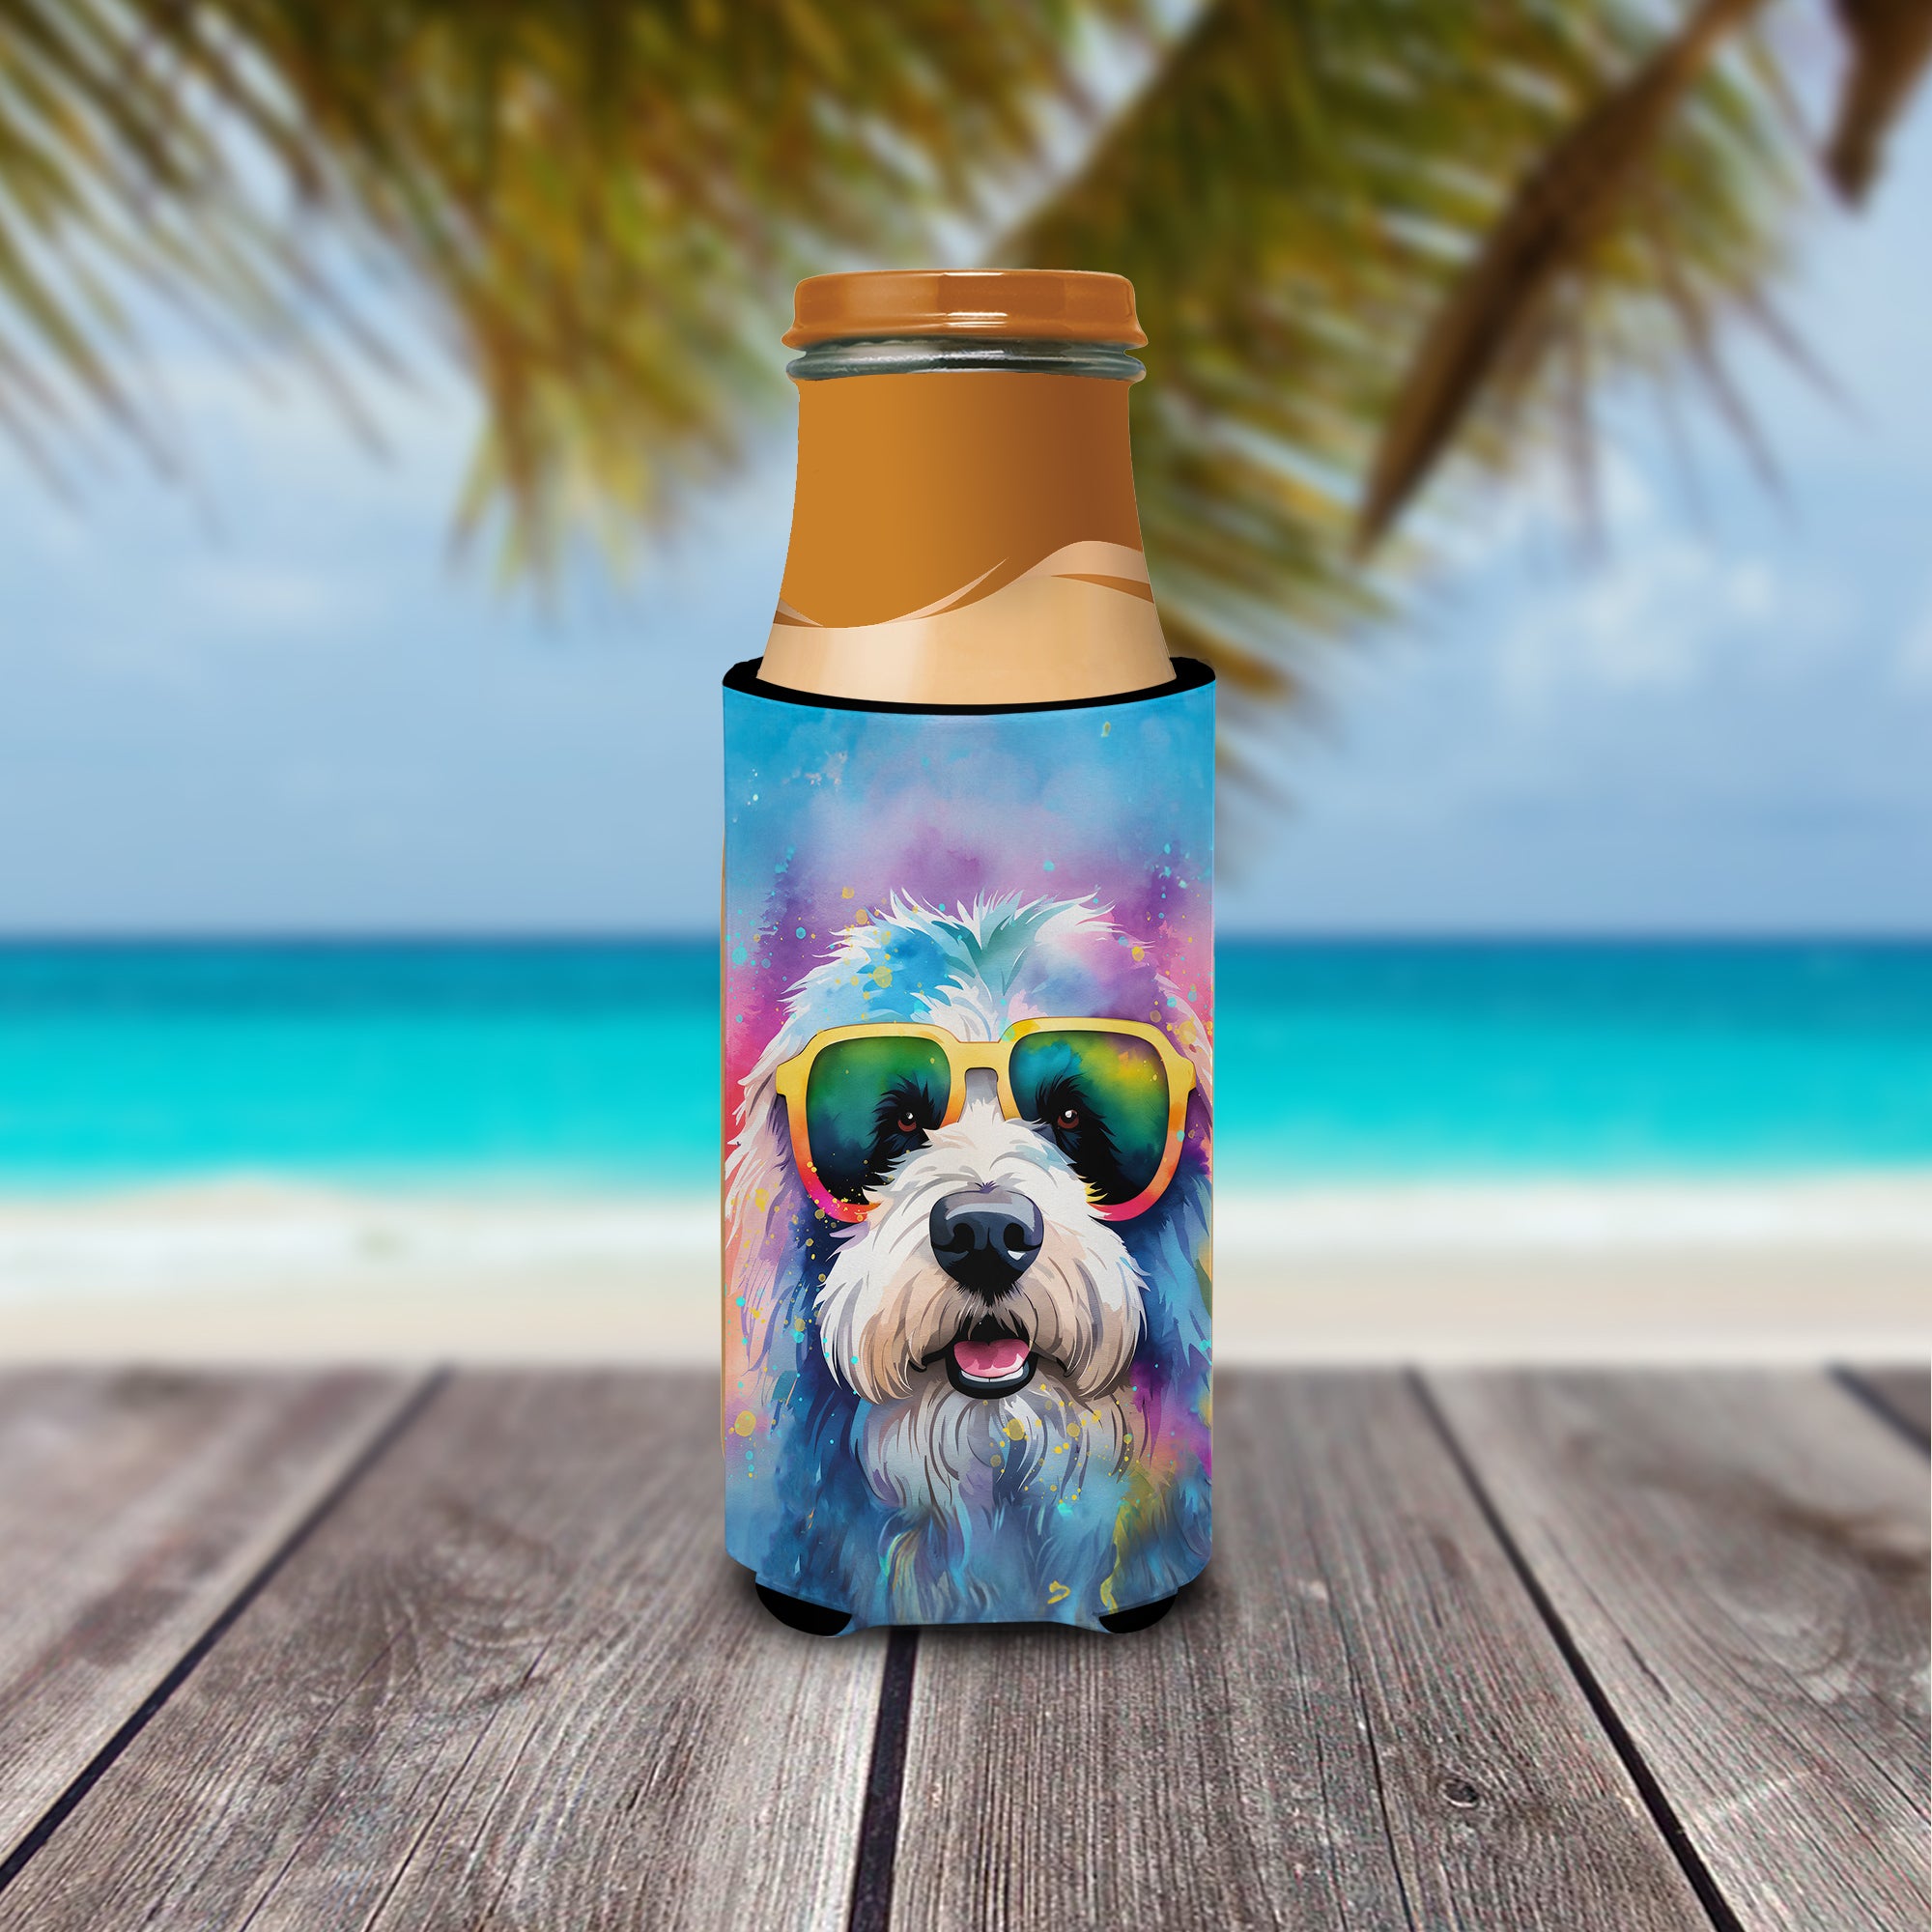 Old English Sheepdog Hippie Dawg Hugger for Ultra Slim Cans